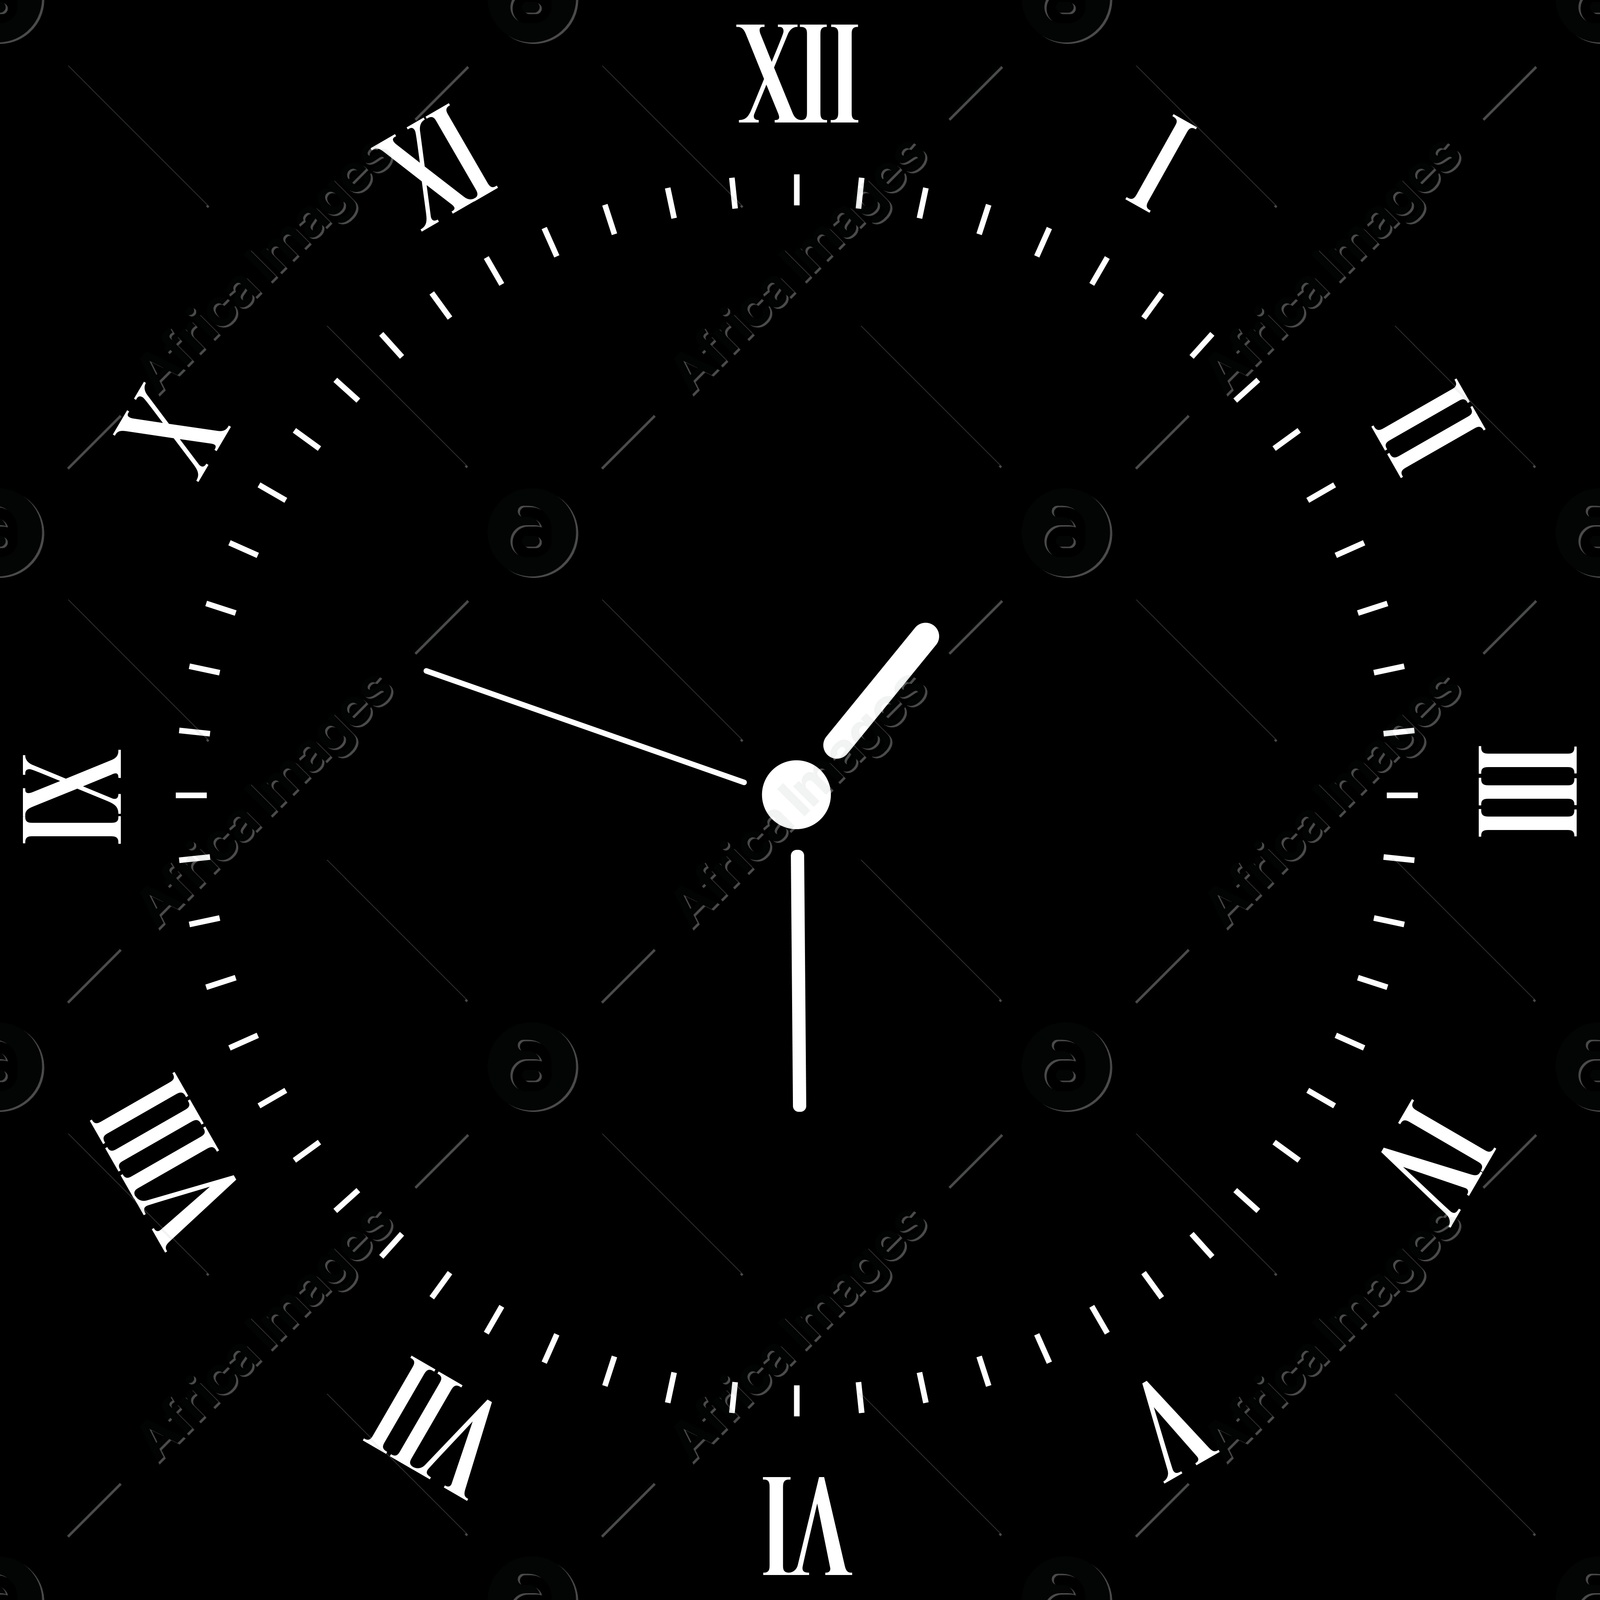 Image of Clock face with roman numerals on black background